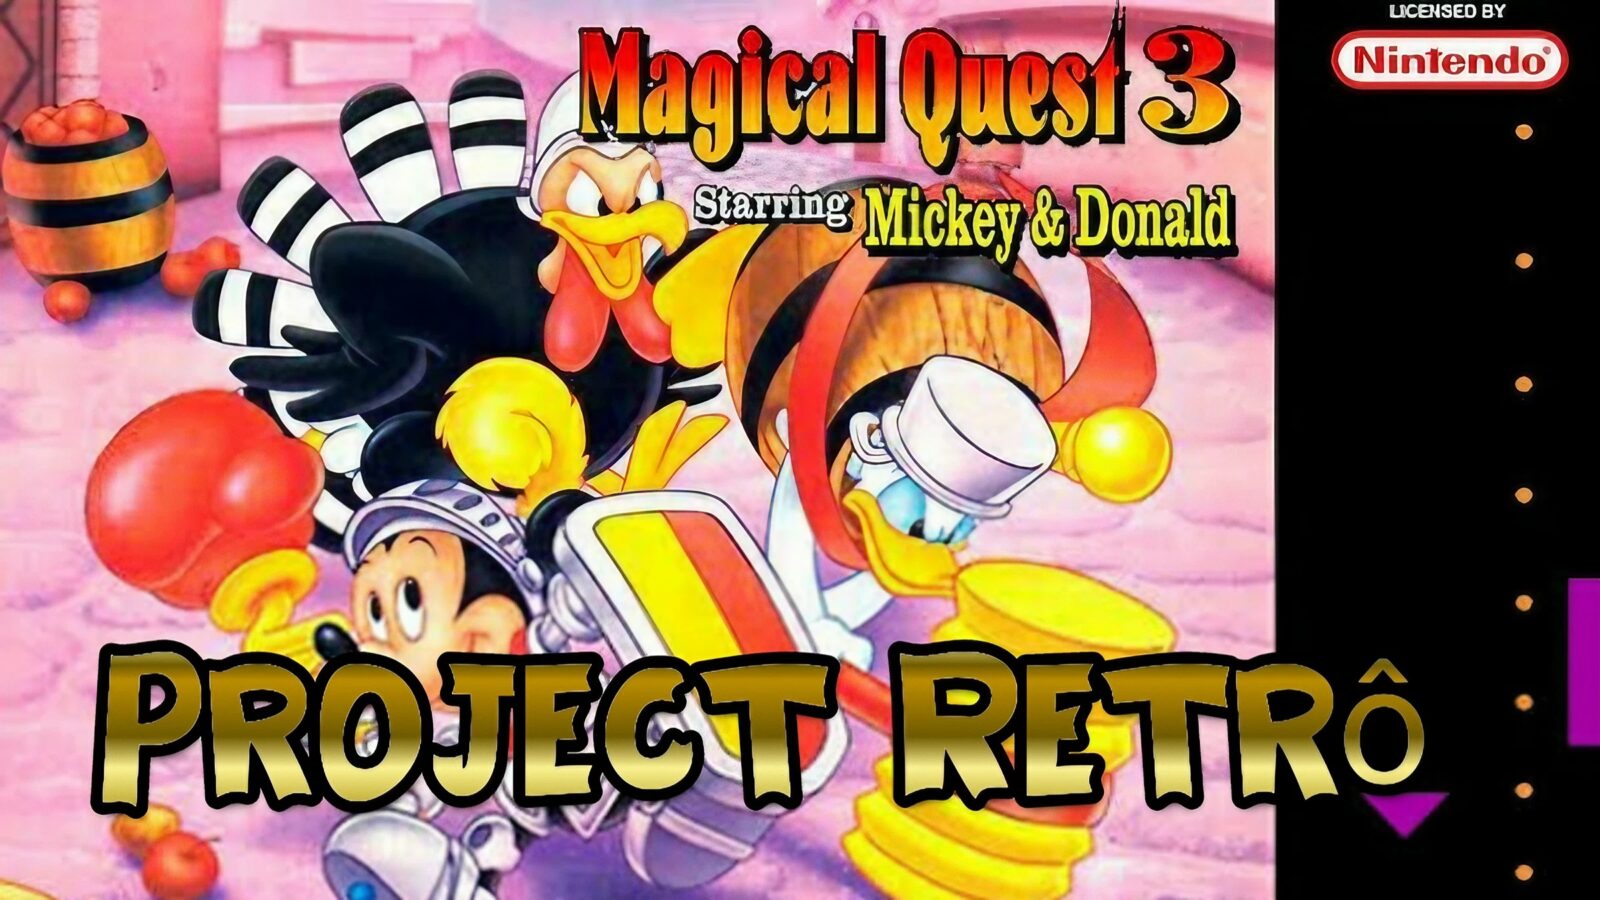 Disney’s Magical Quest 3 starring Mickey and Donald